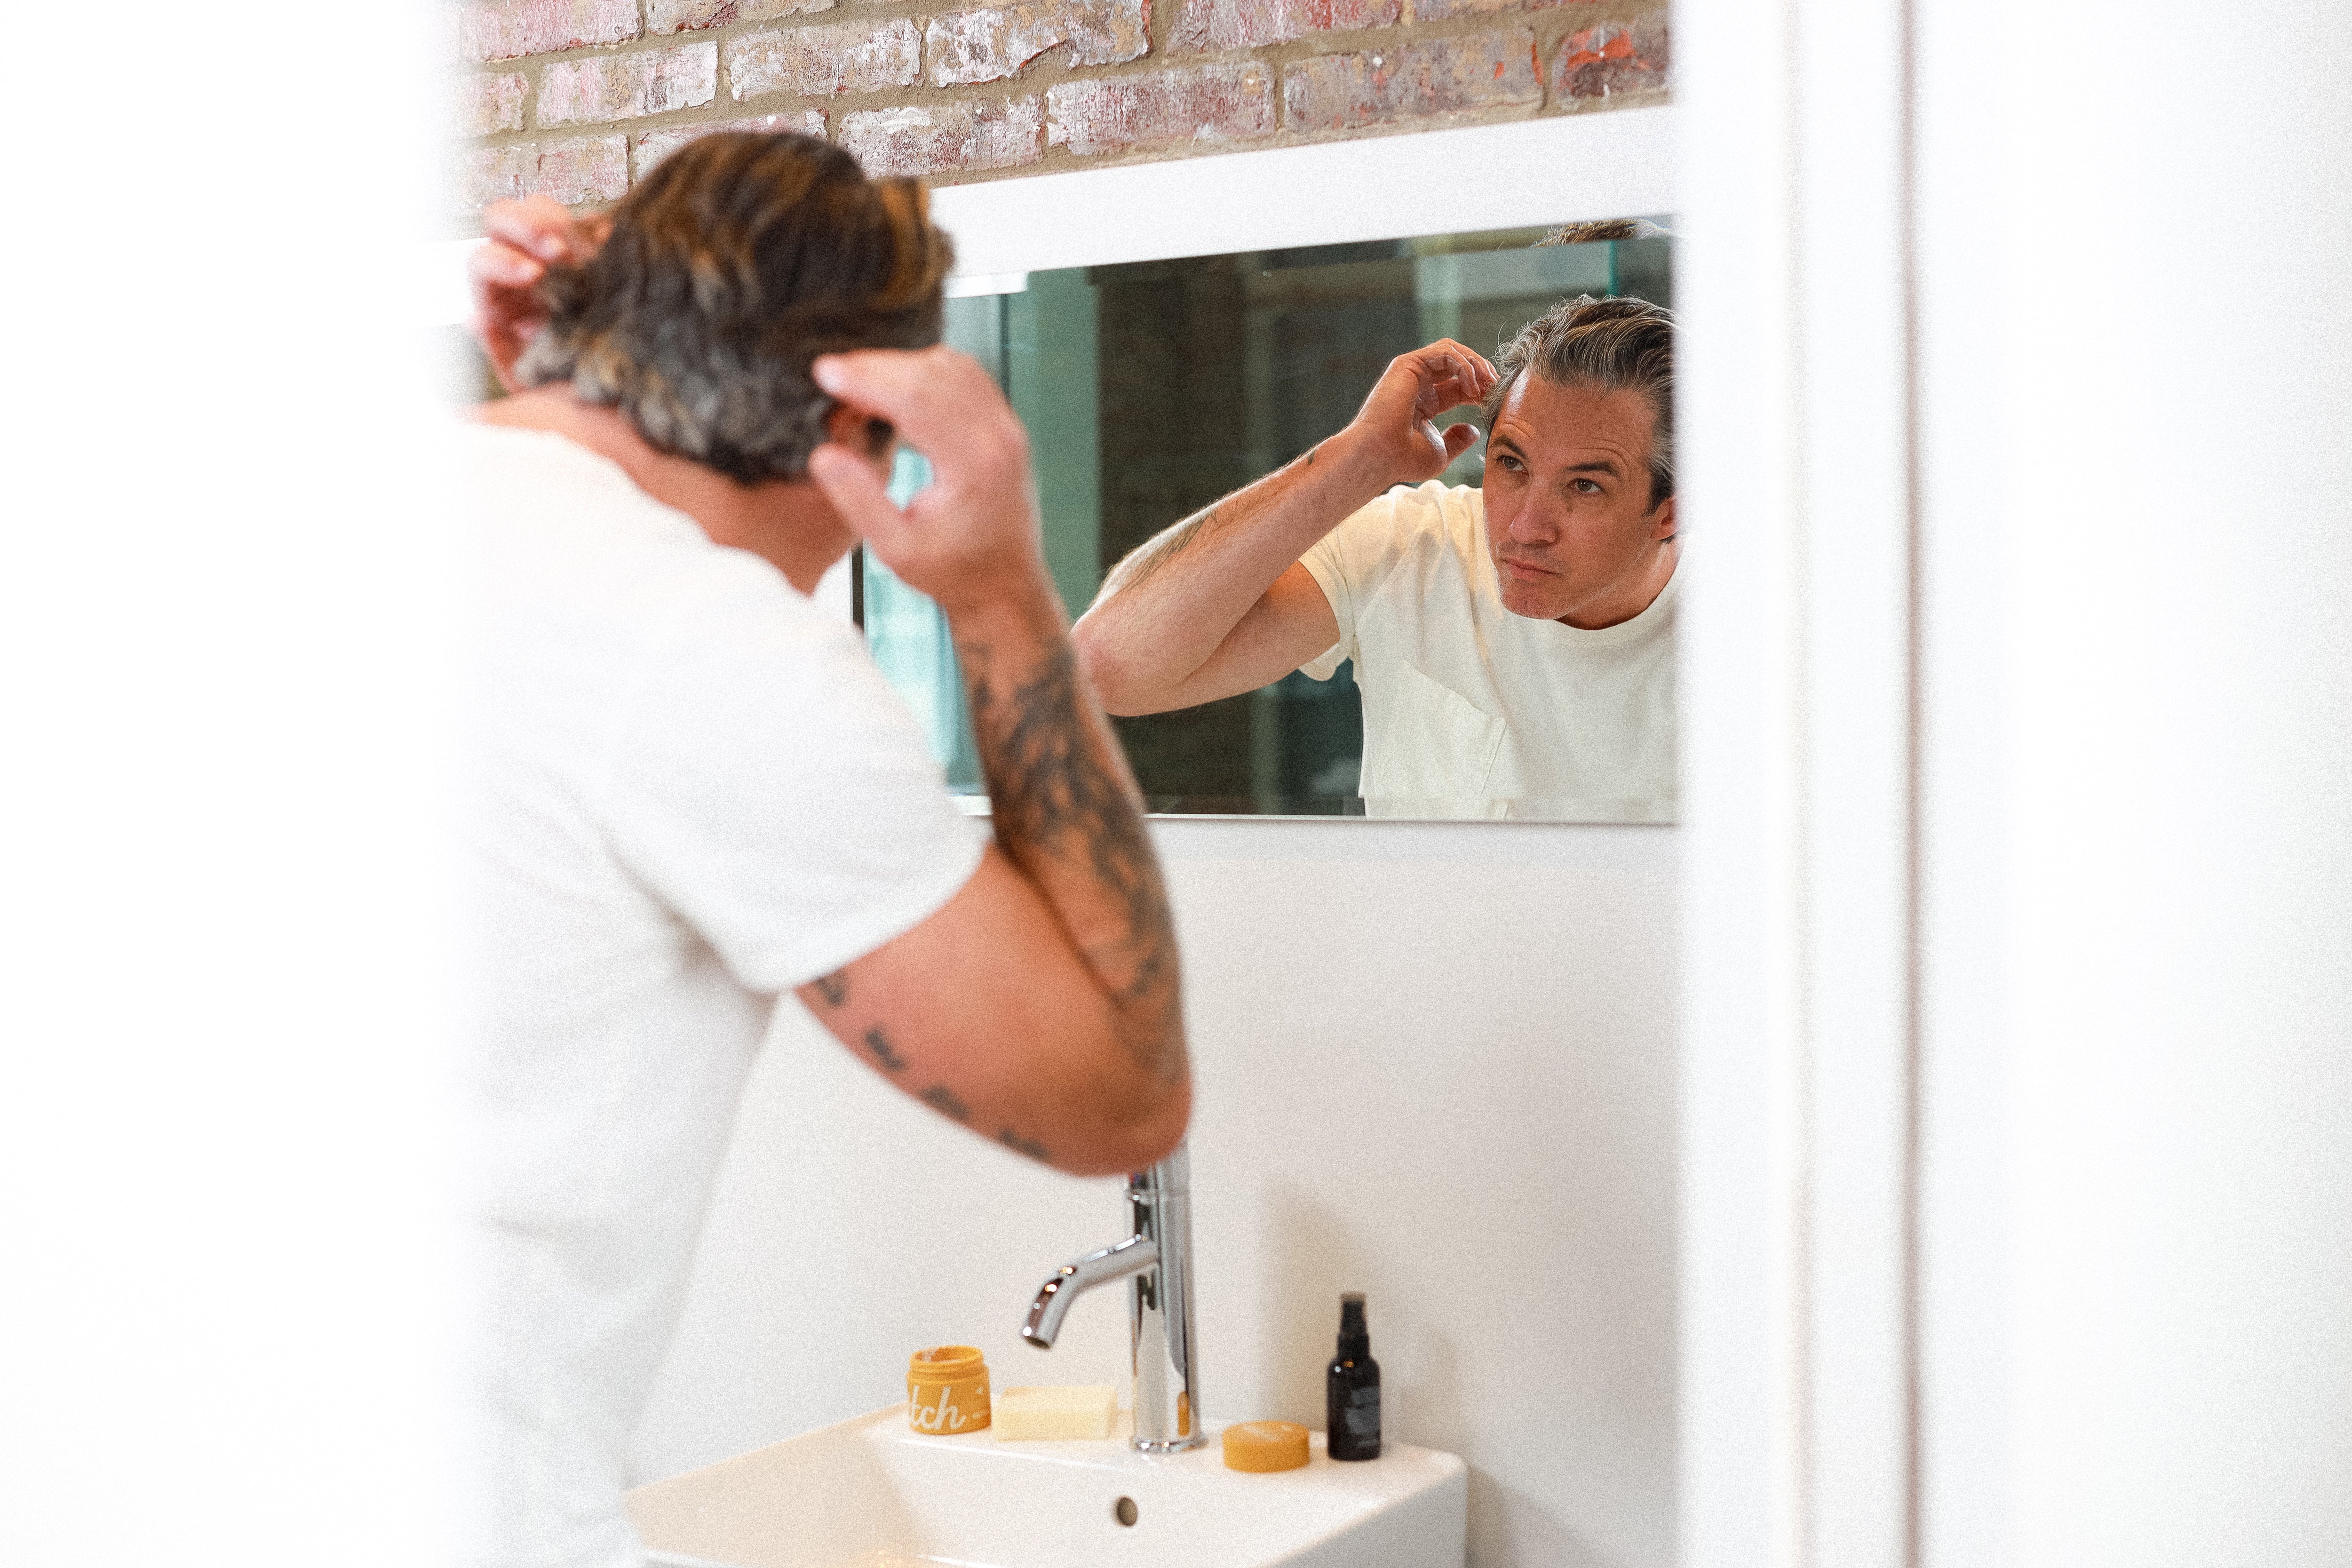 Man styling his hair while looking in mirror.